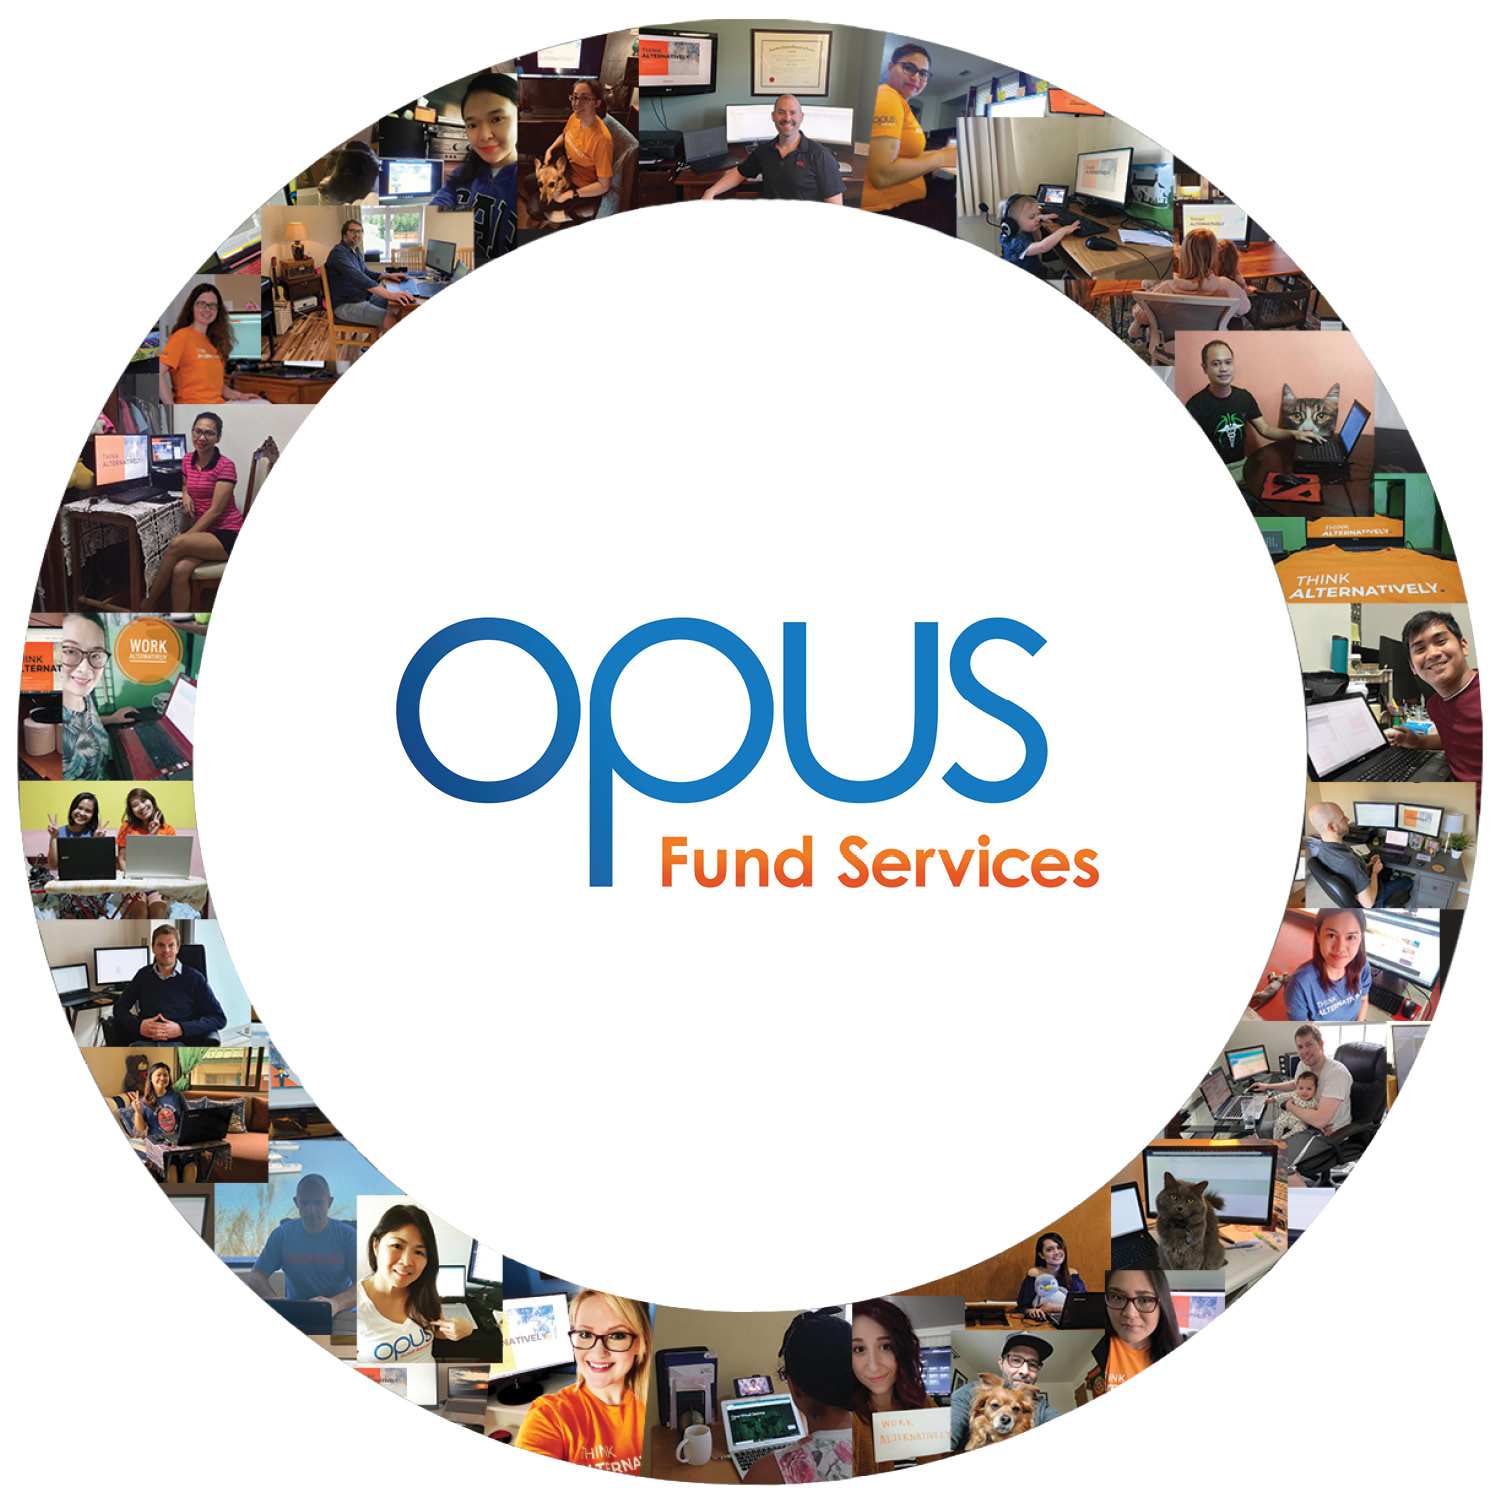 Opus logo surrounded by a circular collage of photos of Opus employees working from home.